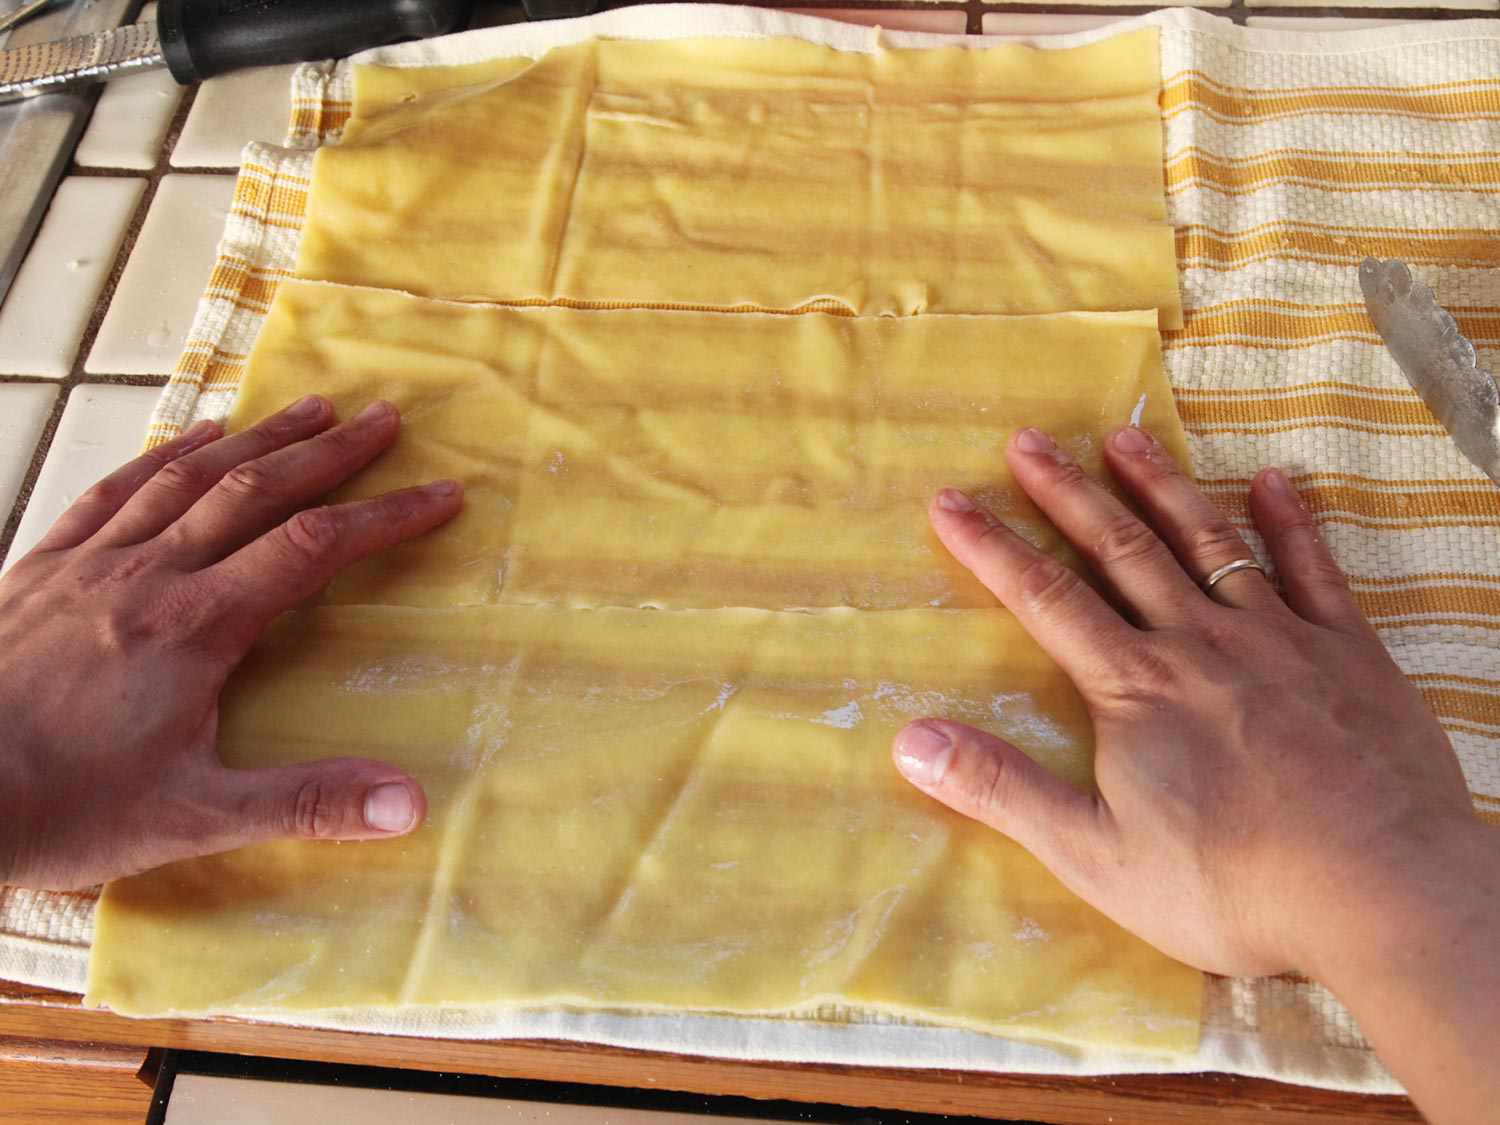 Drying rinsed pasta sheets on dish towels